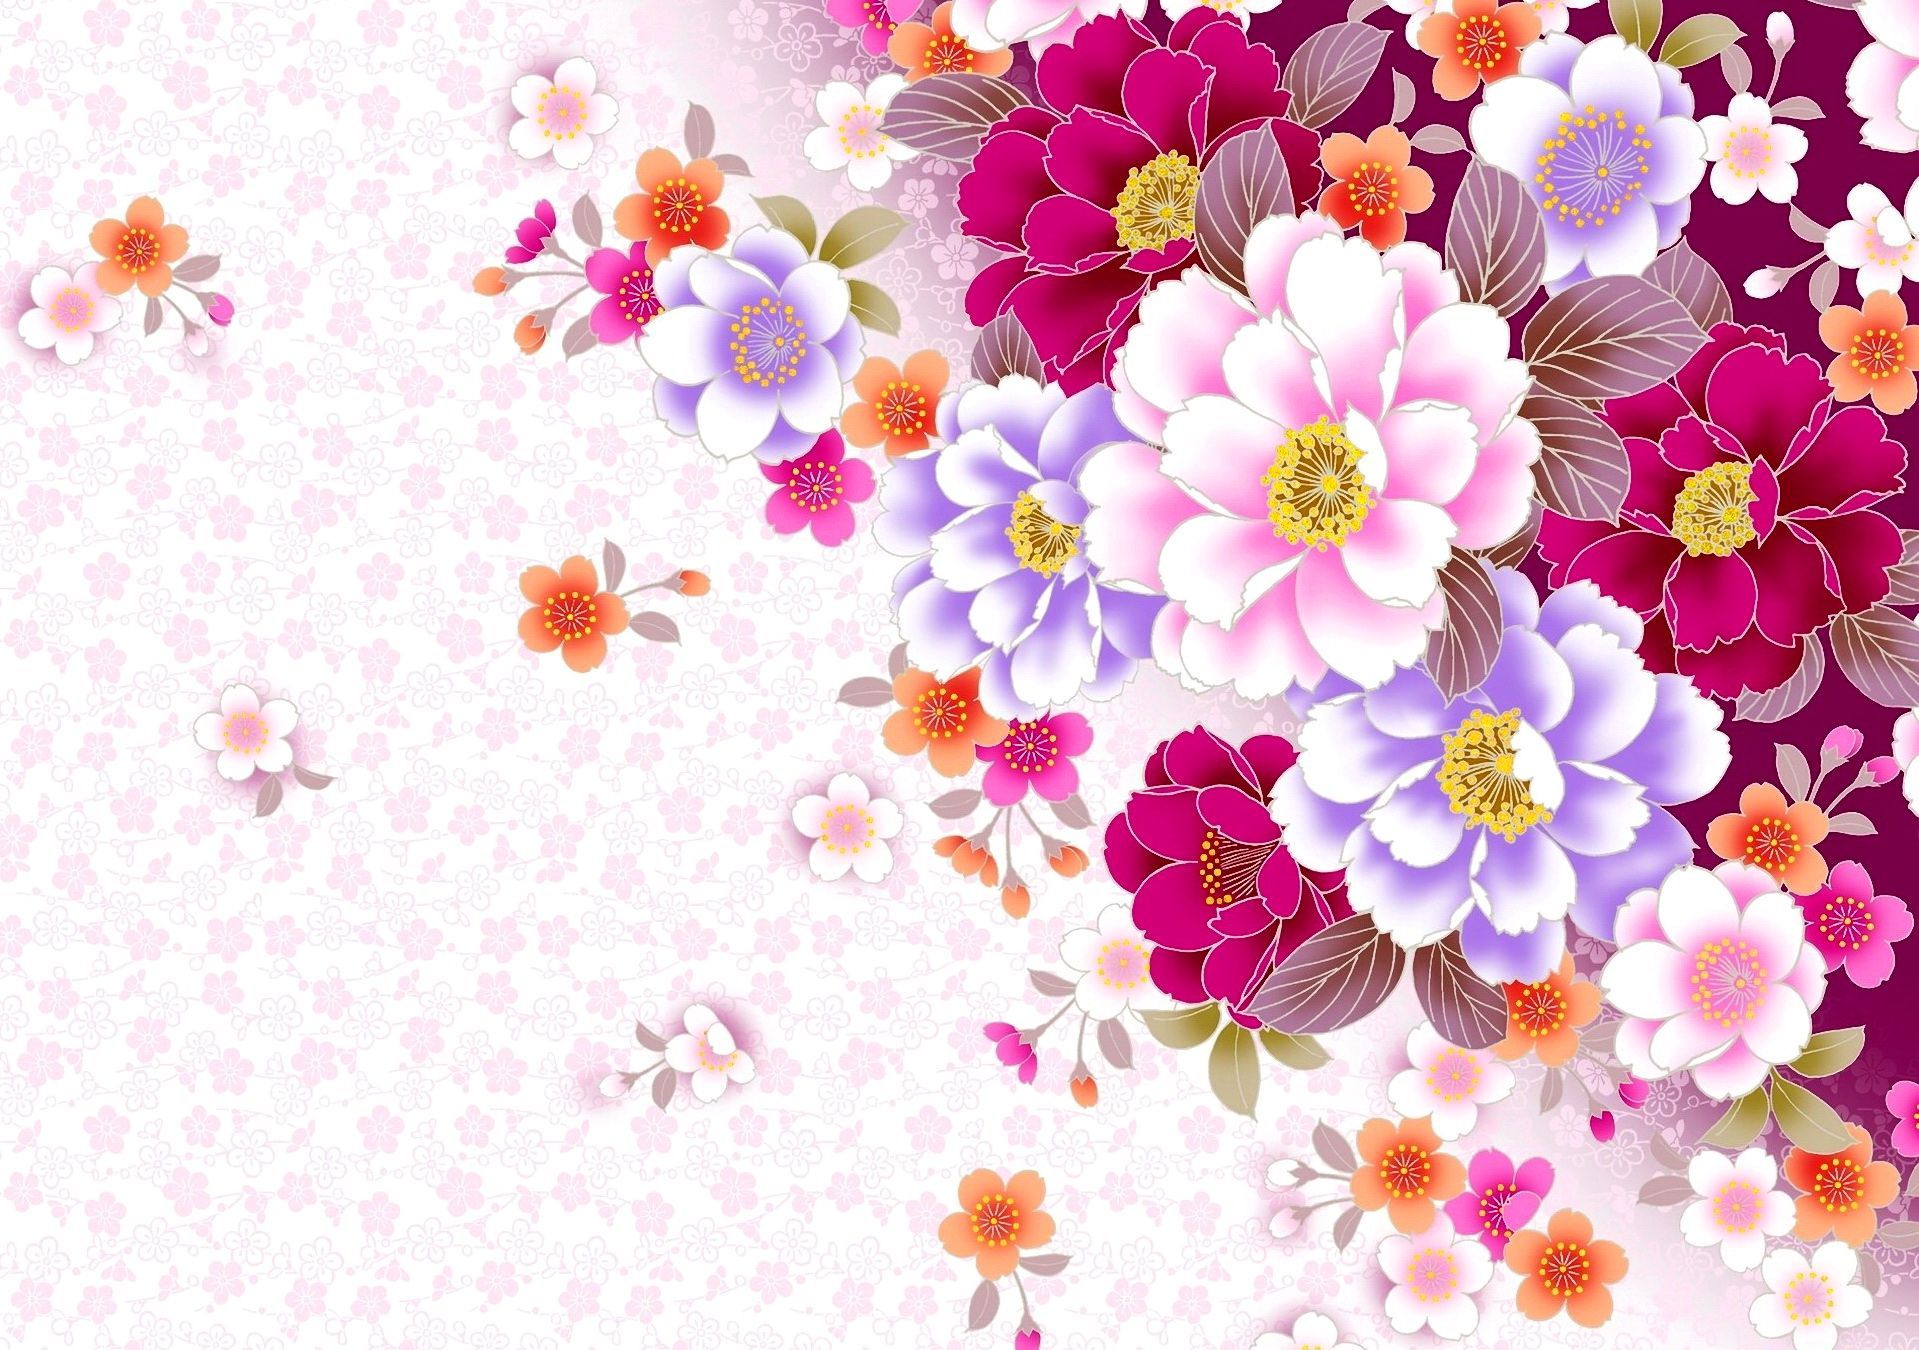 wallpapers and backgrounds,flower,petal,pink,floral design,plant